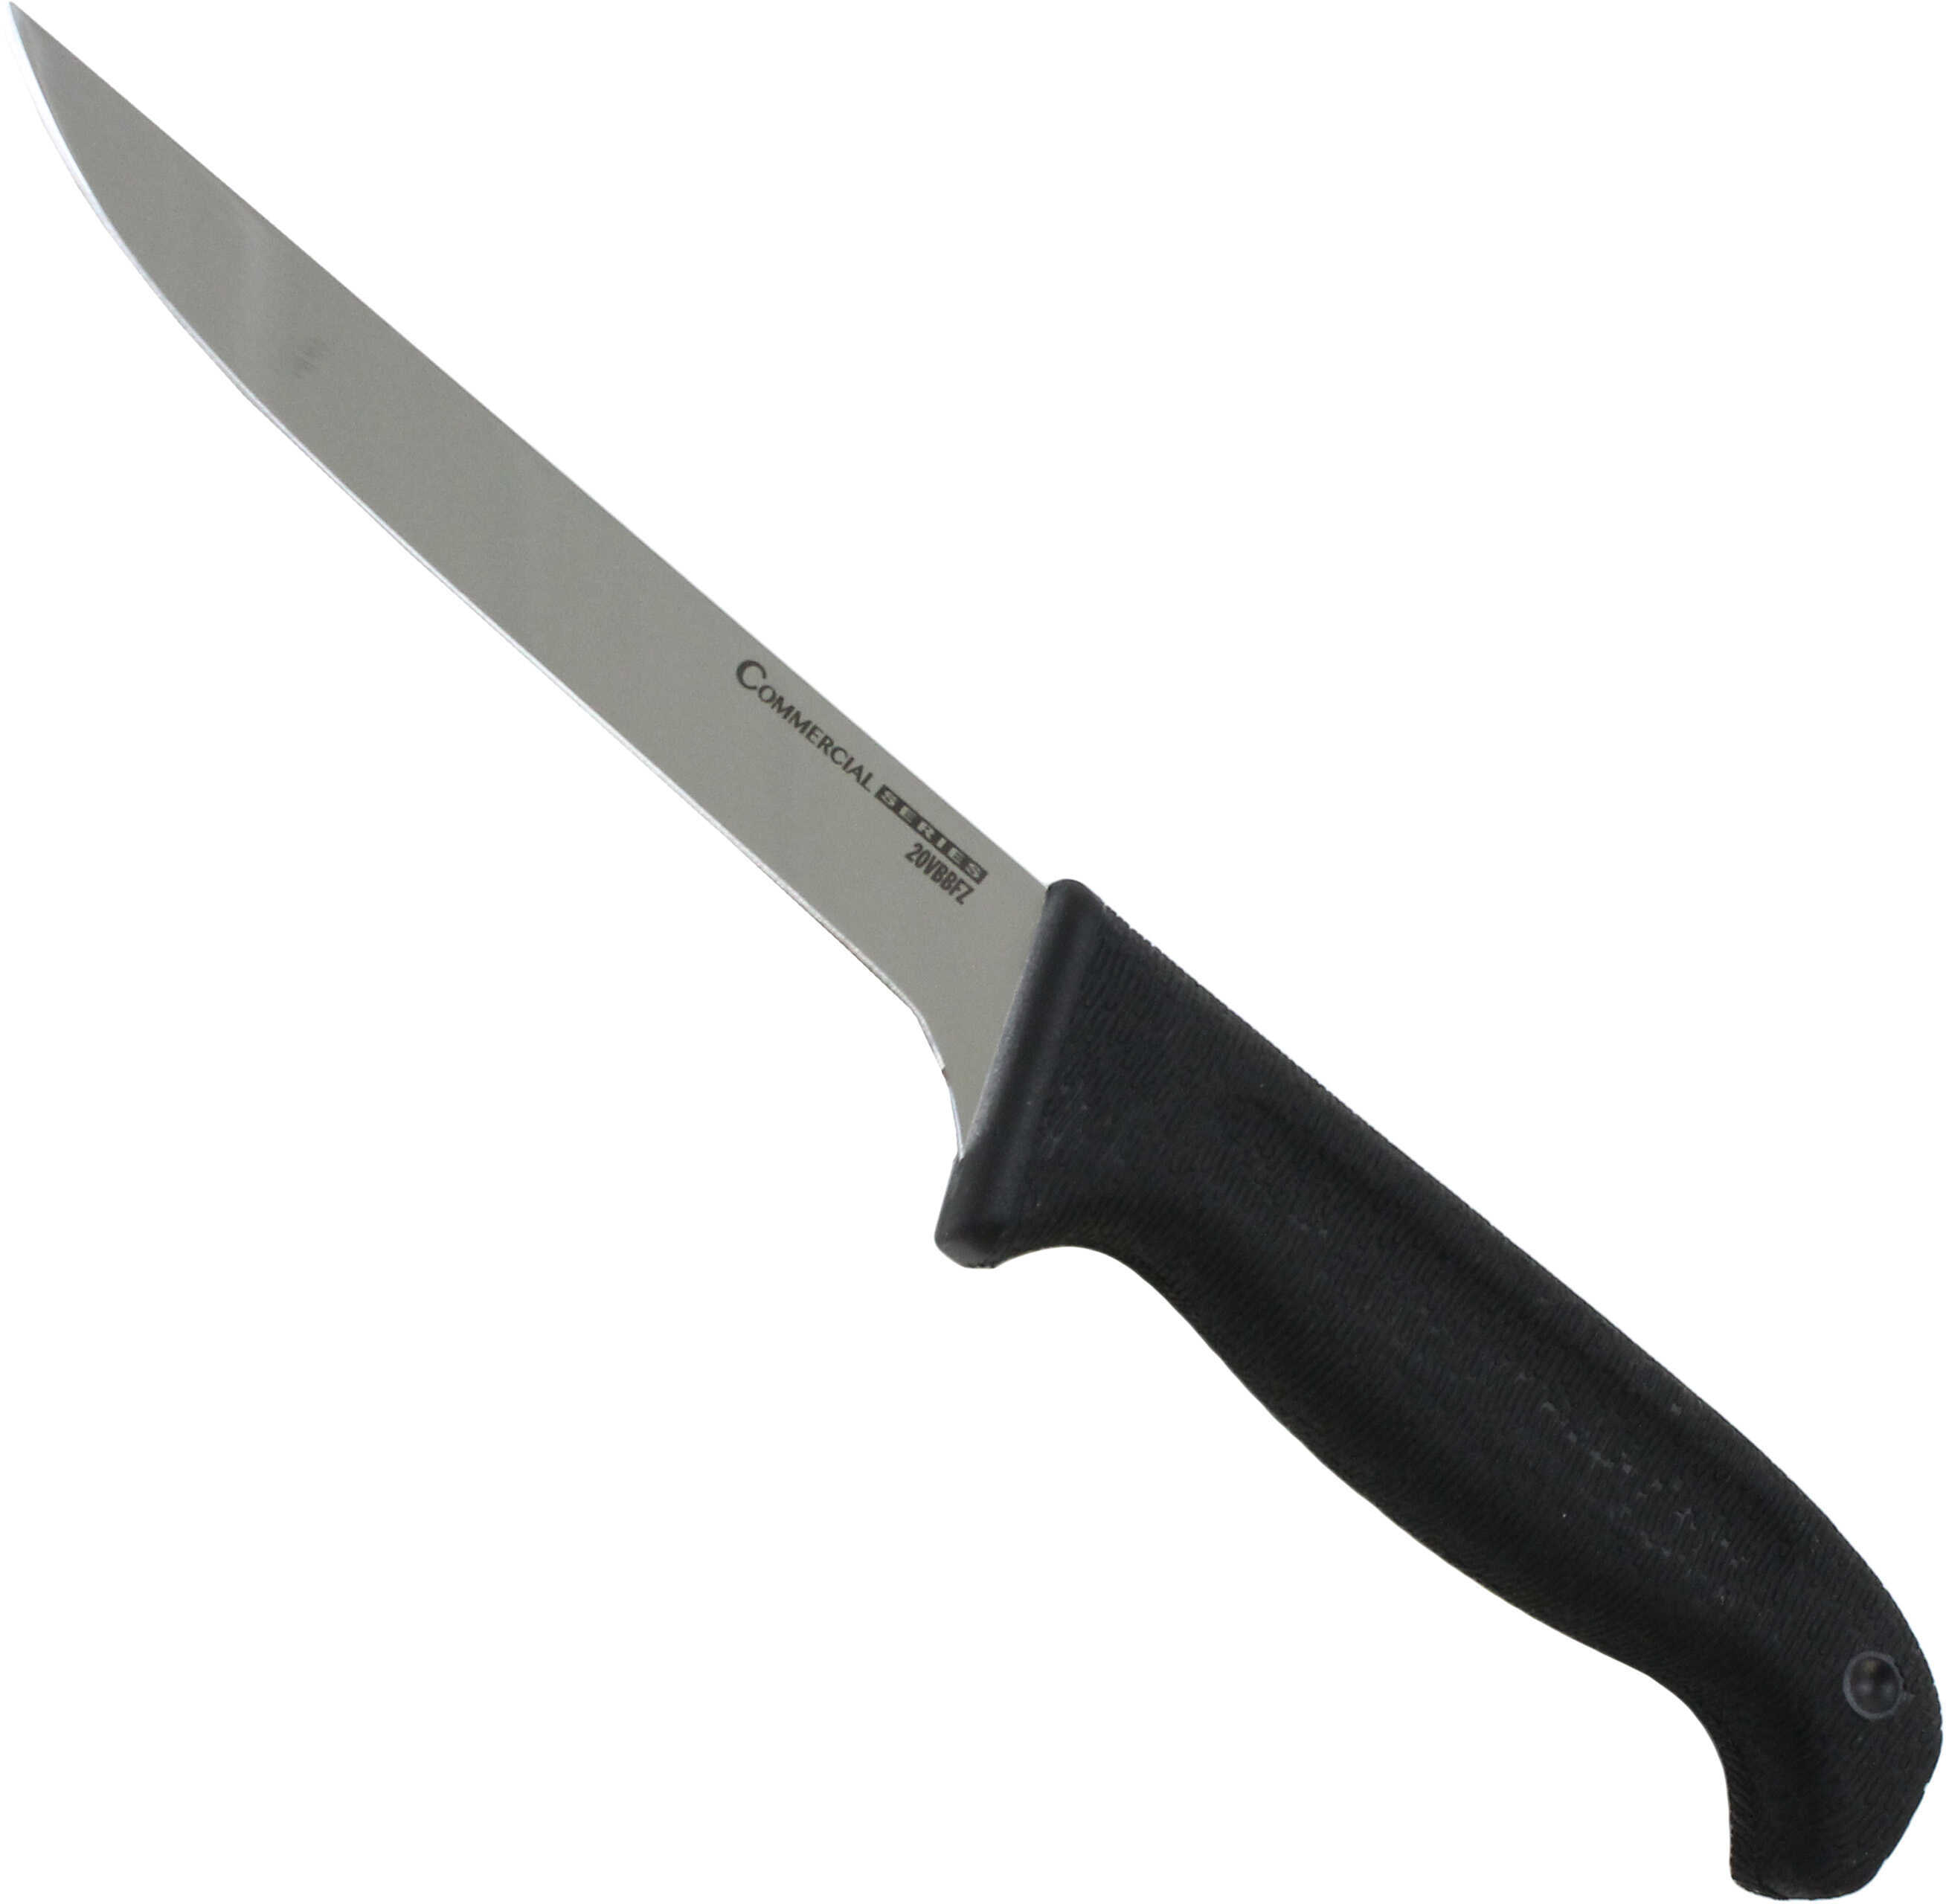 Cold Steel Commercial Series Flexible Boning Knife Md: 20VBBFZ